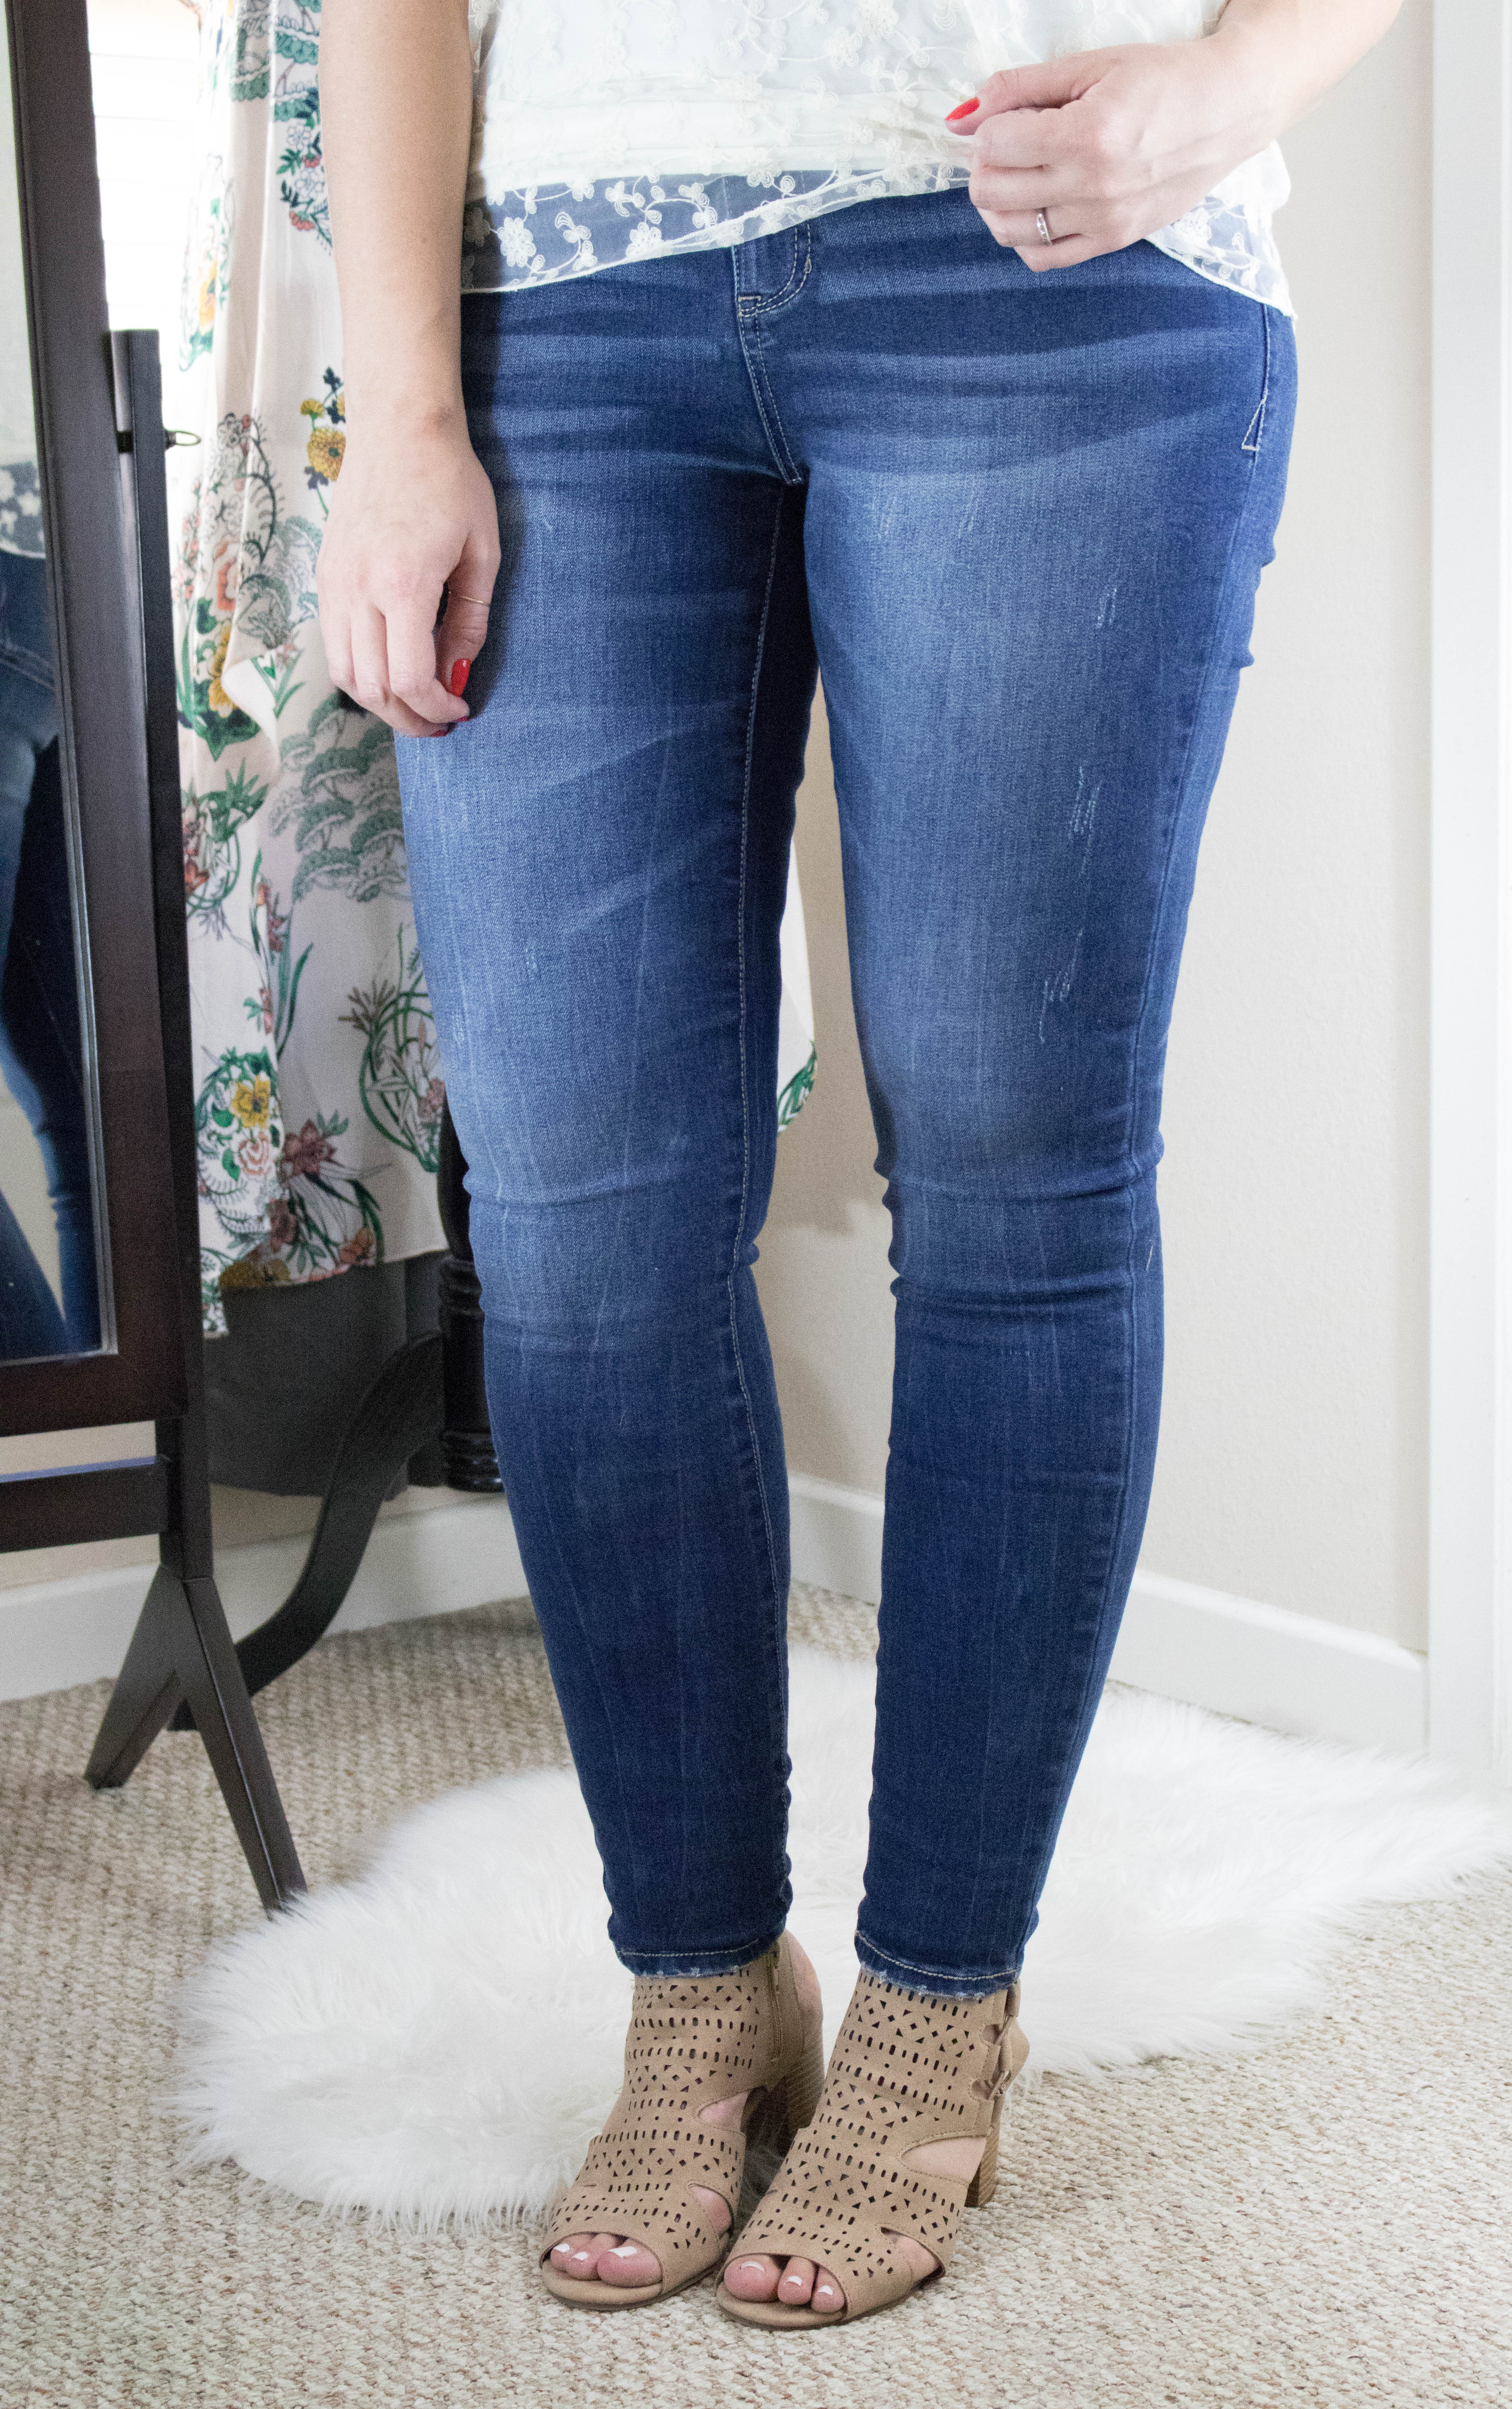 maurices high rise jeggings #discovermaurices #maurices #denim #jeggings